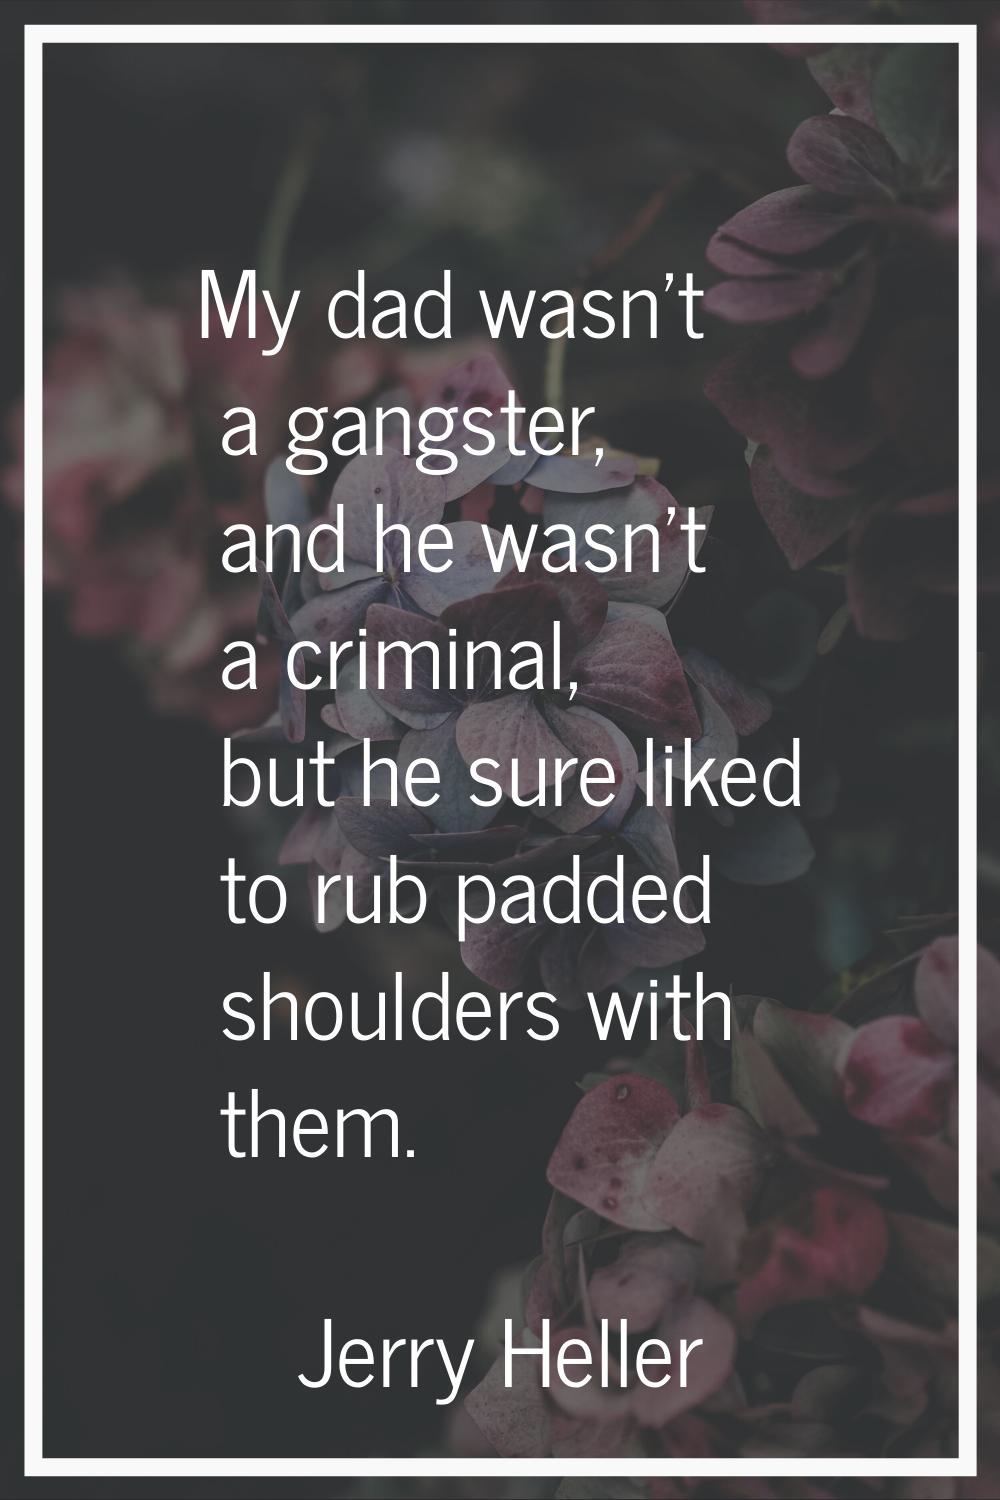 My dad wasn't a gangster, and he wasn't a criminal, but he sure liked to rub padded shoulders with 